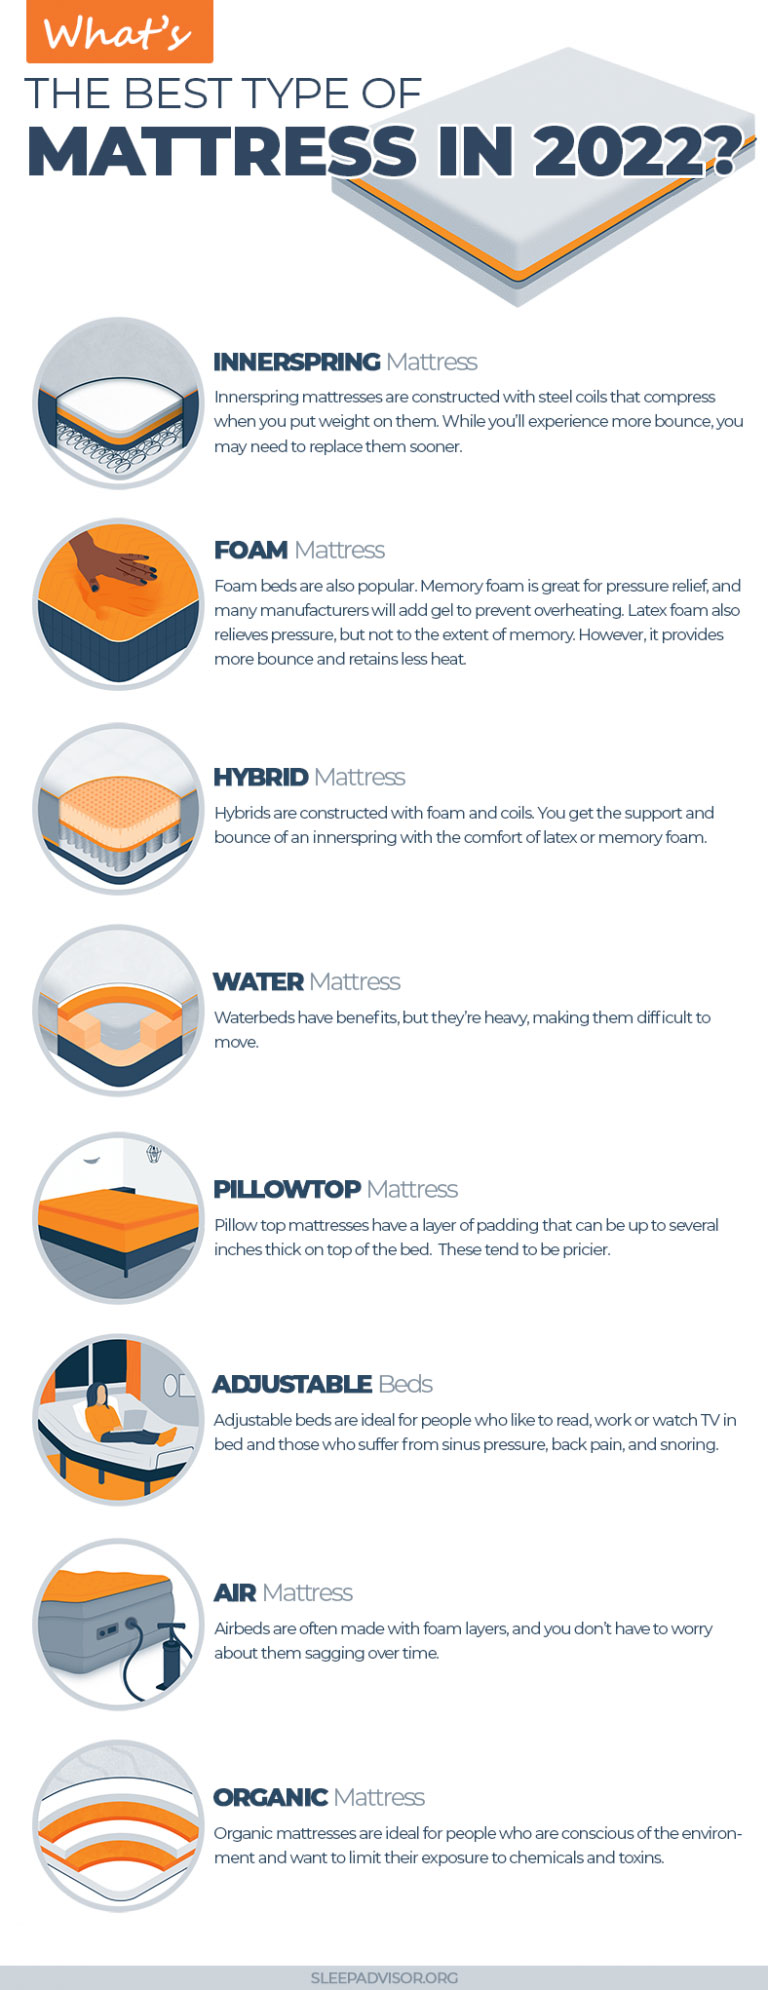 What Type Of Mattress Should You Choose?